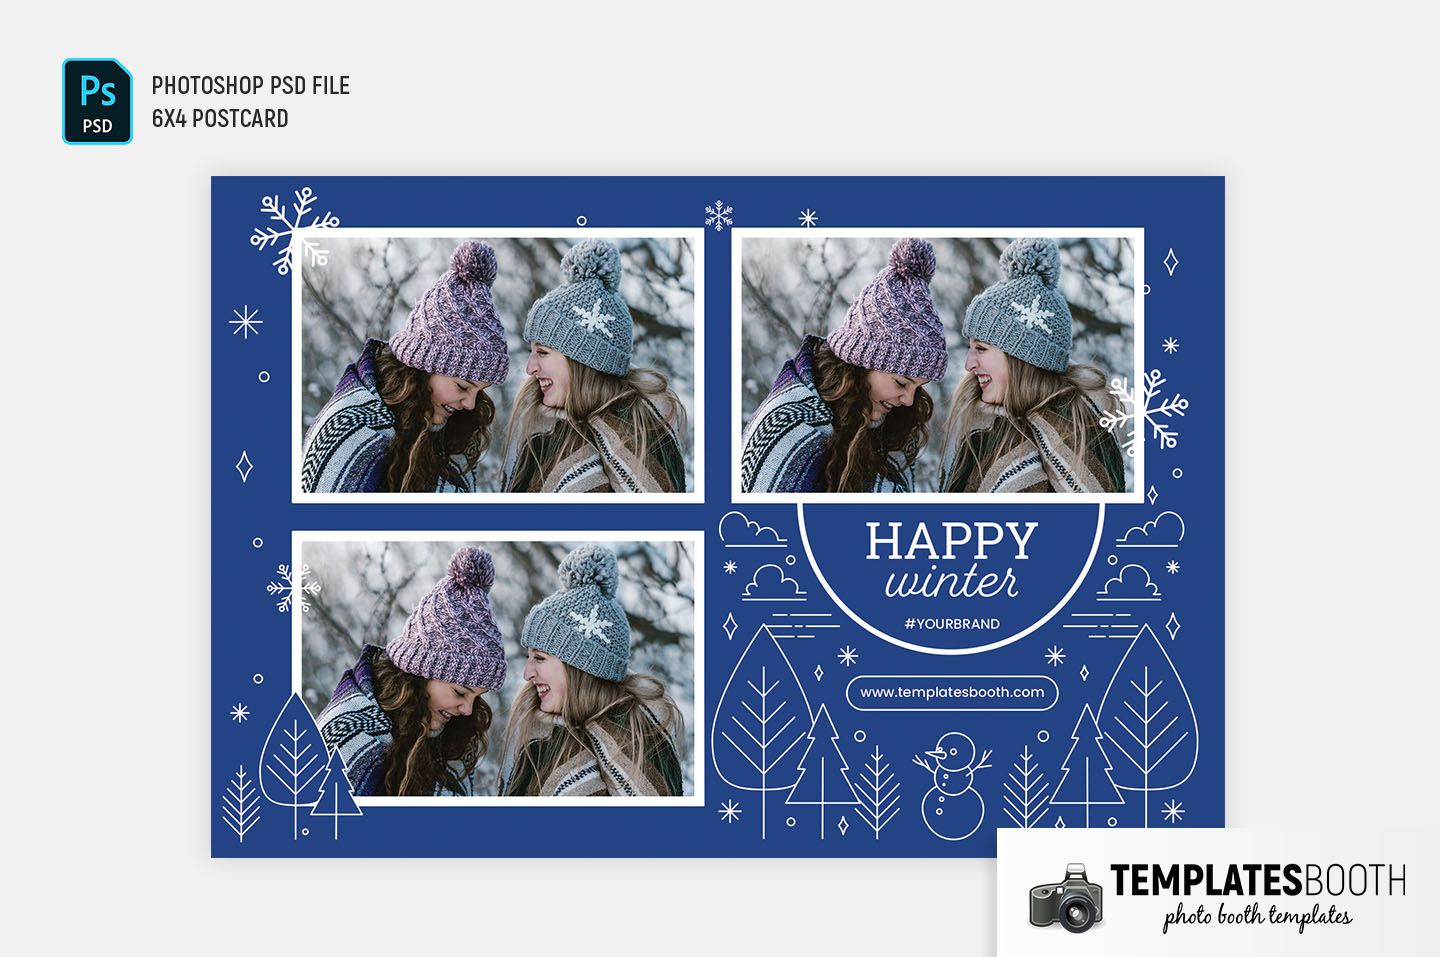 Ornate Winter Photo Booth Template